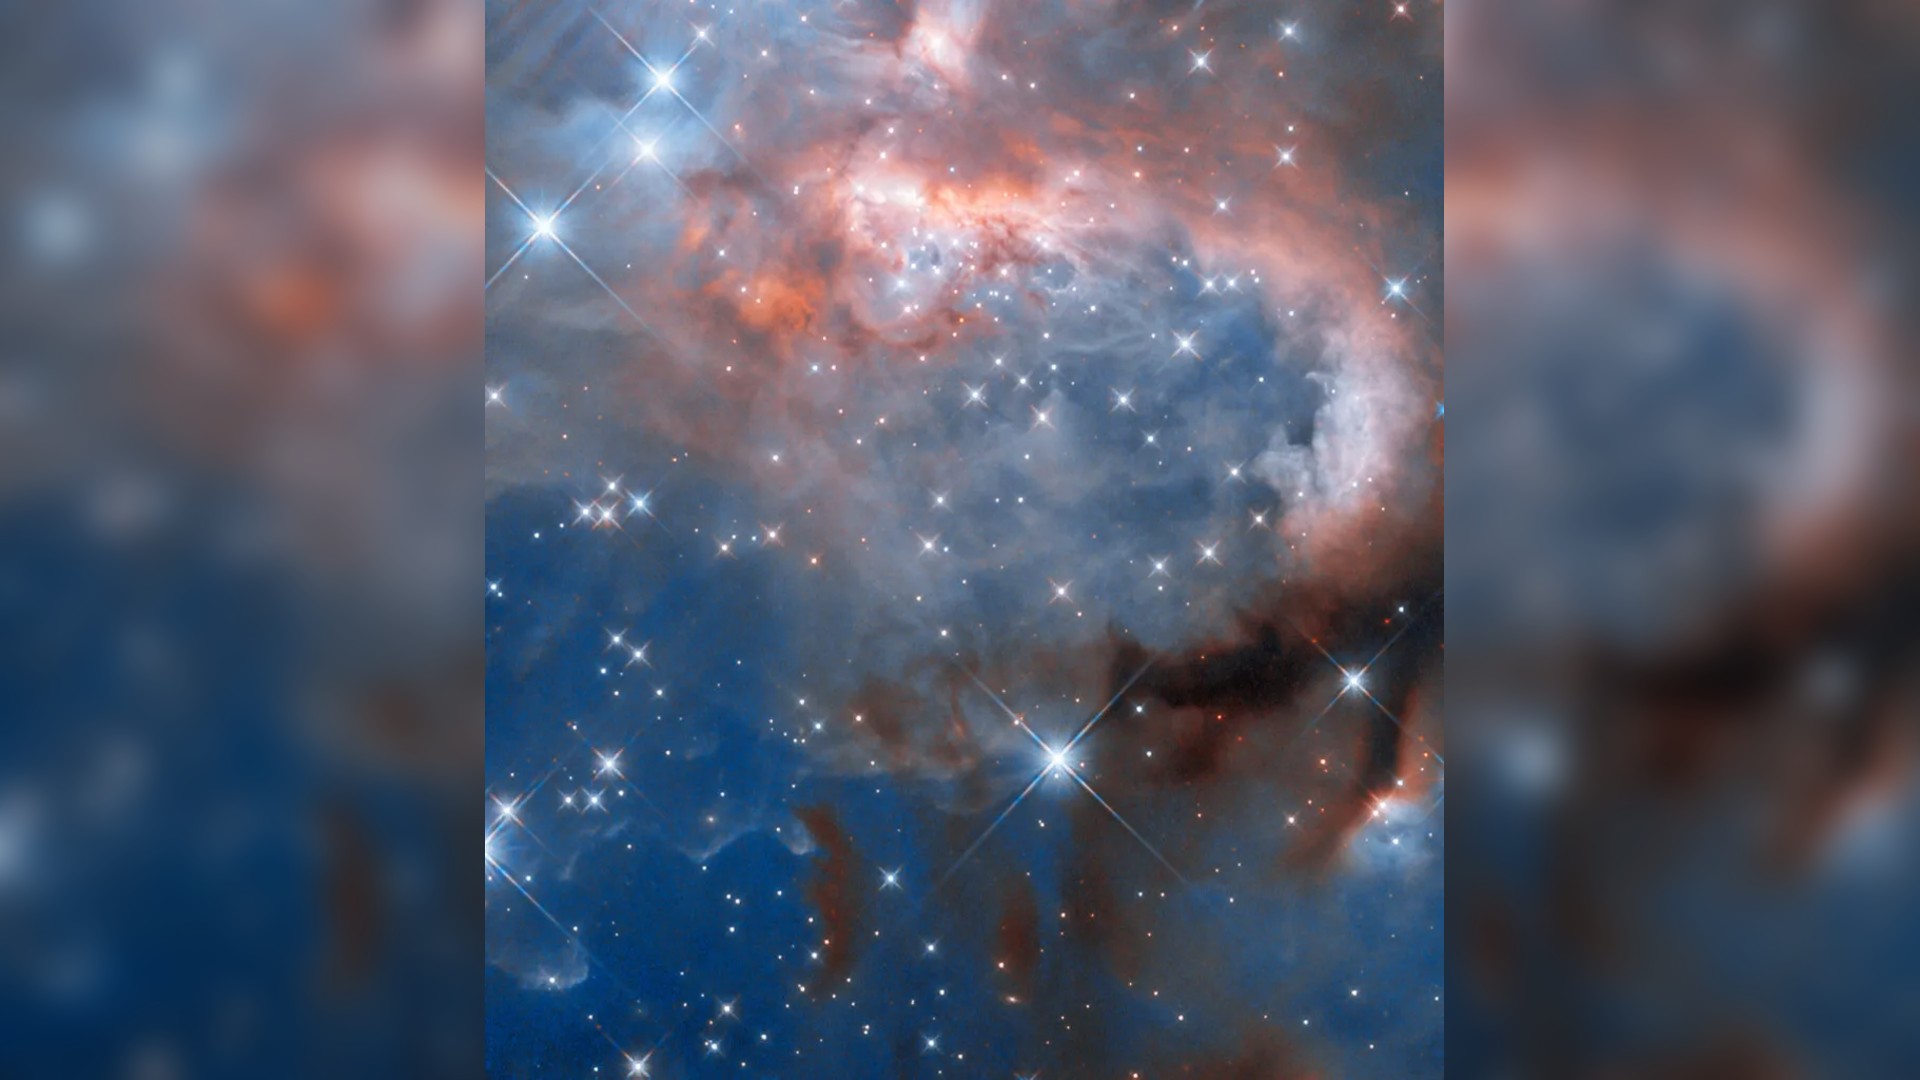  Hubble Telescope spies baby stars in their glowing stellar cocoon (photo) 